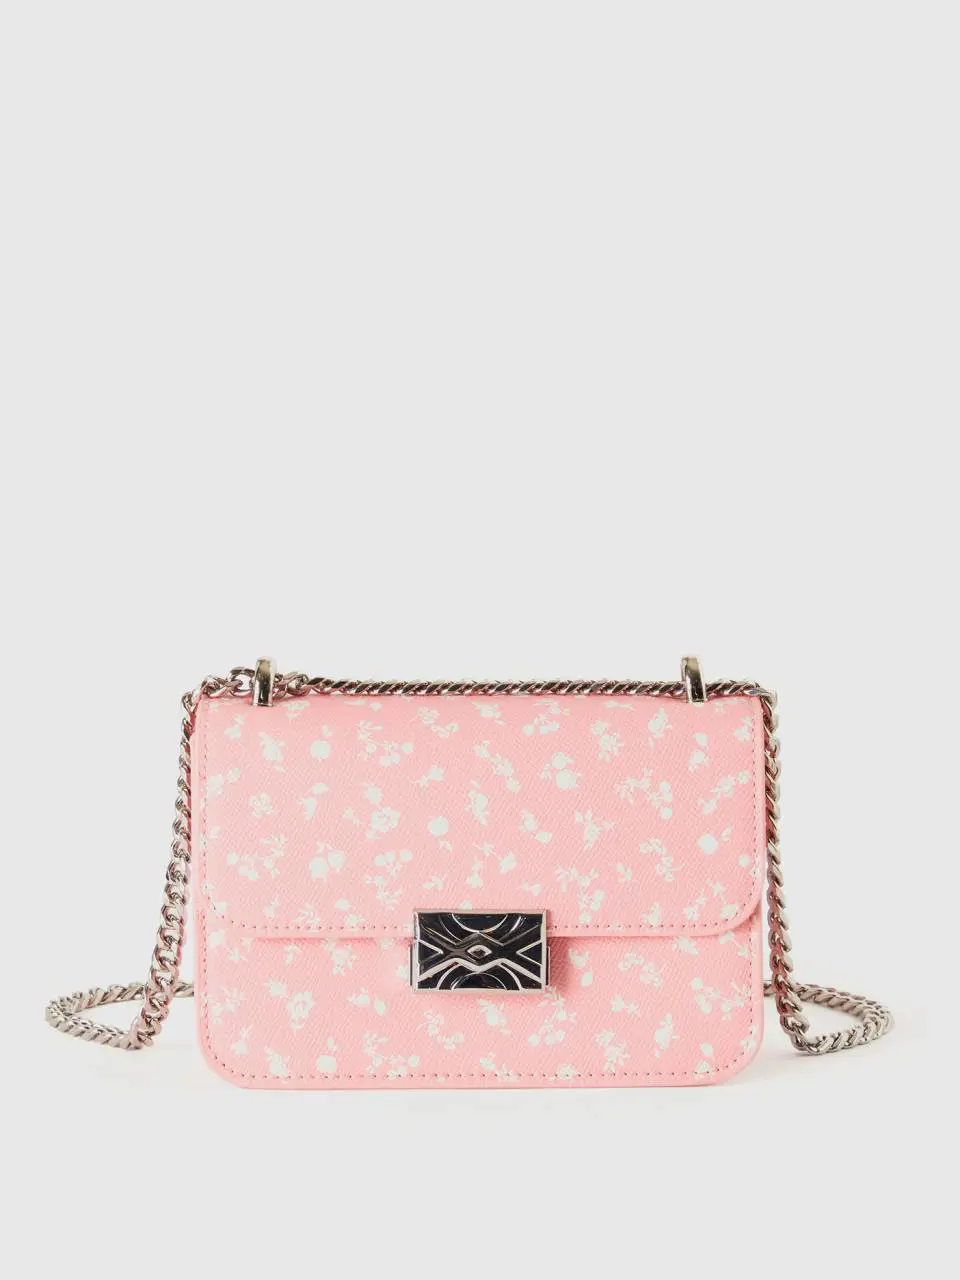 Benetton small pink patterned be bag. 1